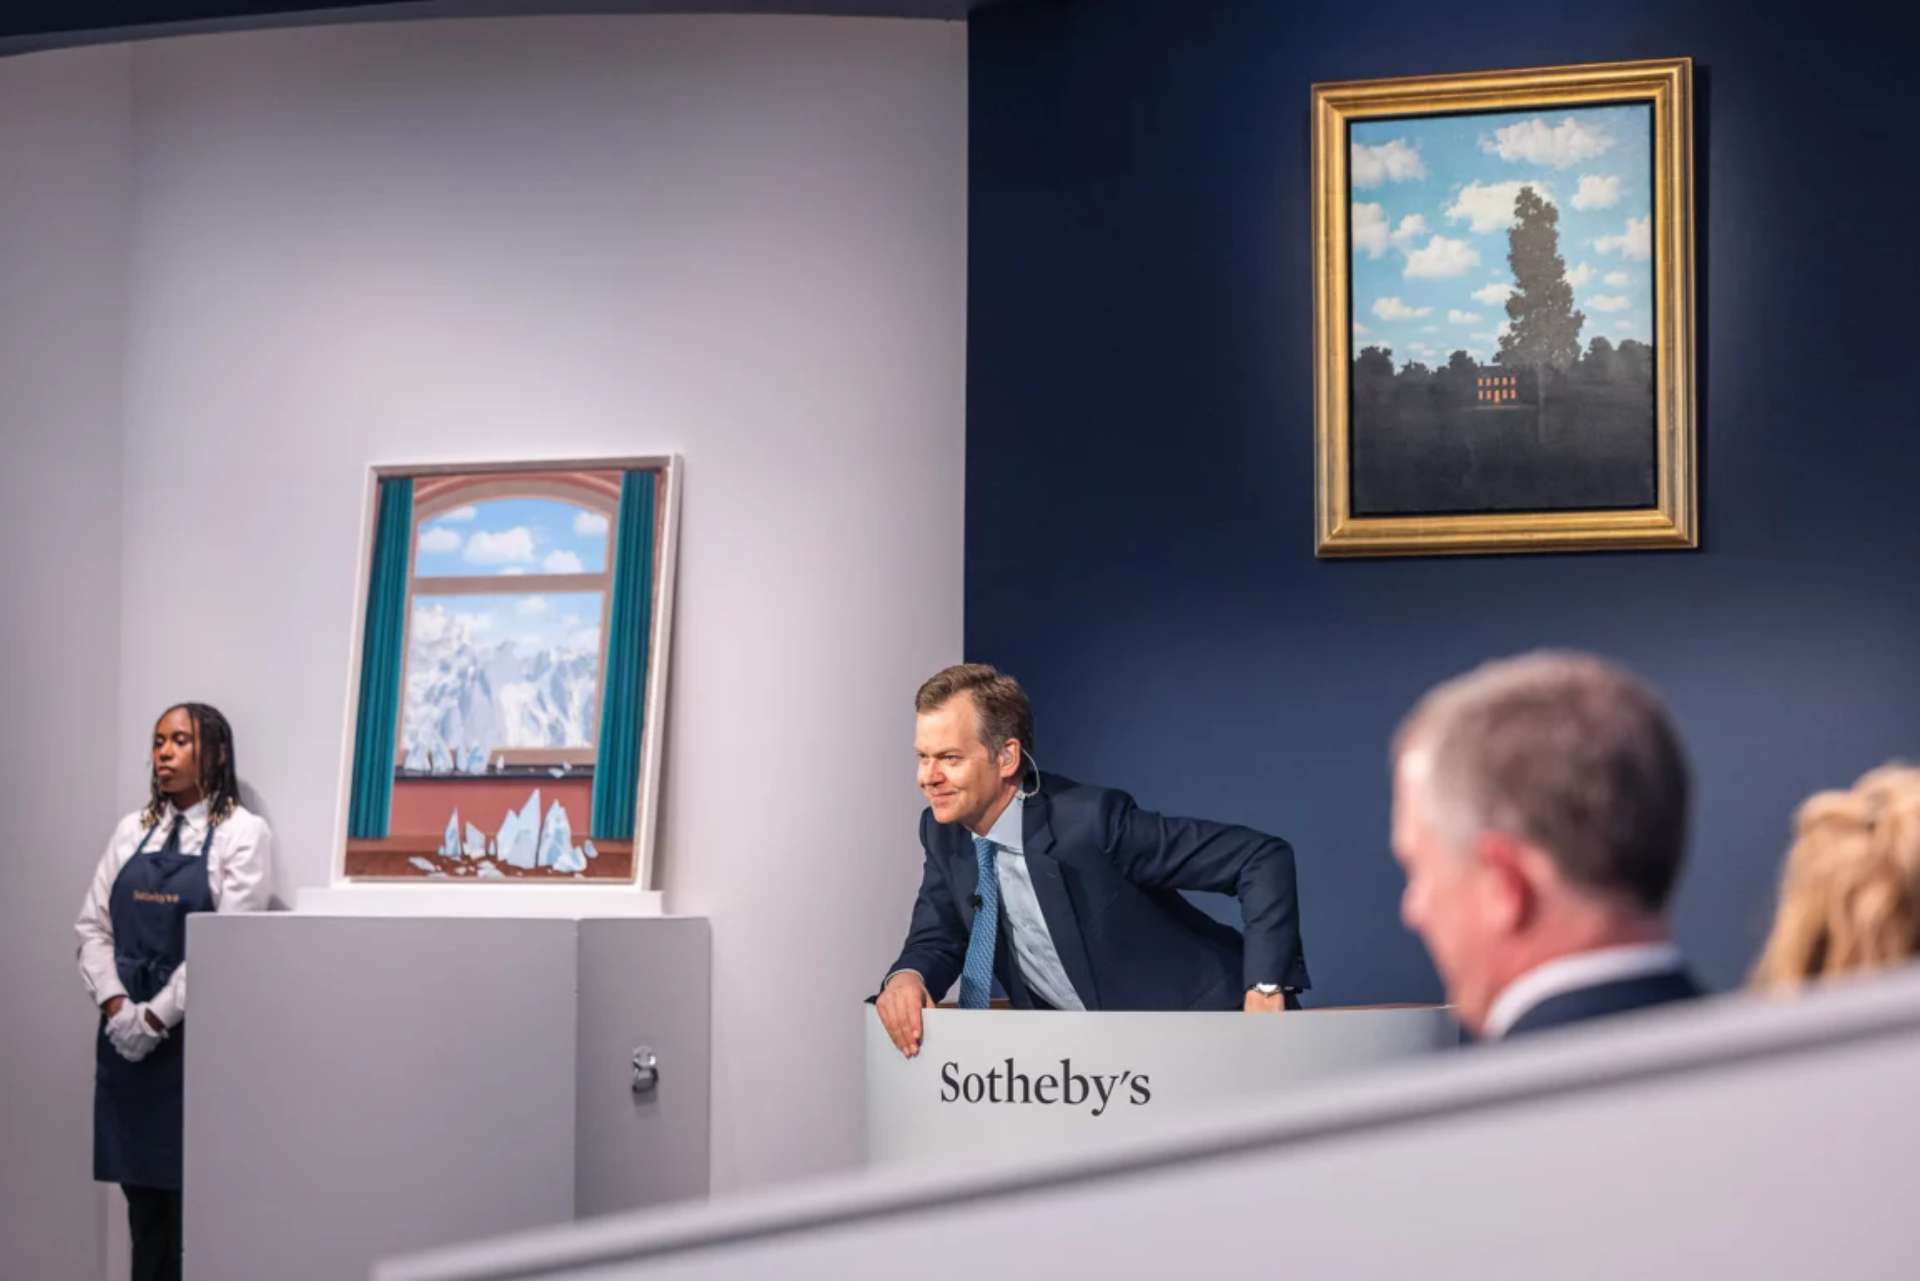 A photograph capturing a moment from Sotheby’s live auction, The Mo ostin Collection. The auctioneer leans over the podium, resting on one arm, eagerly awaiting the next bid. 